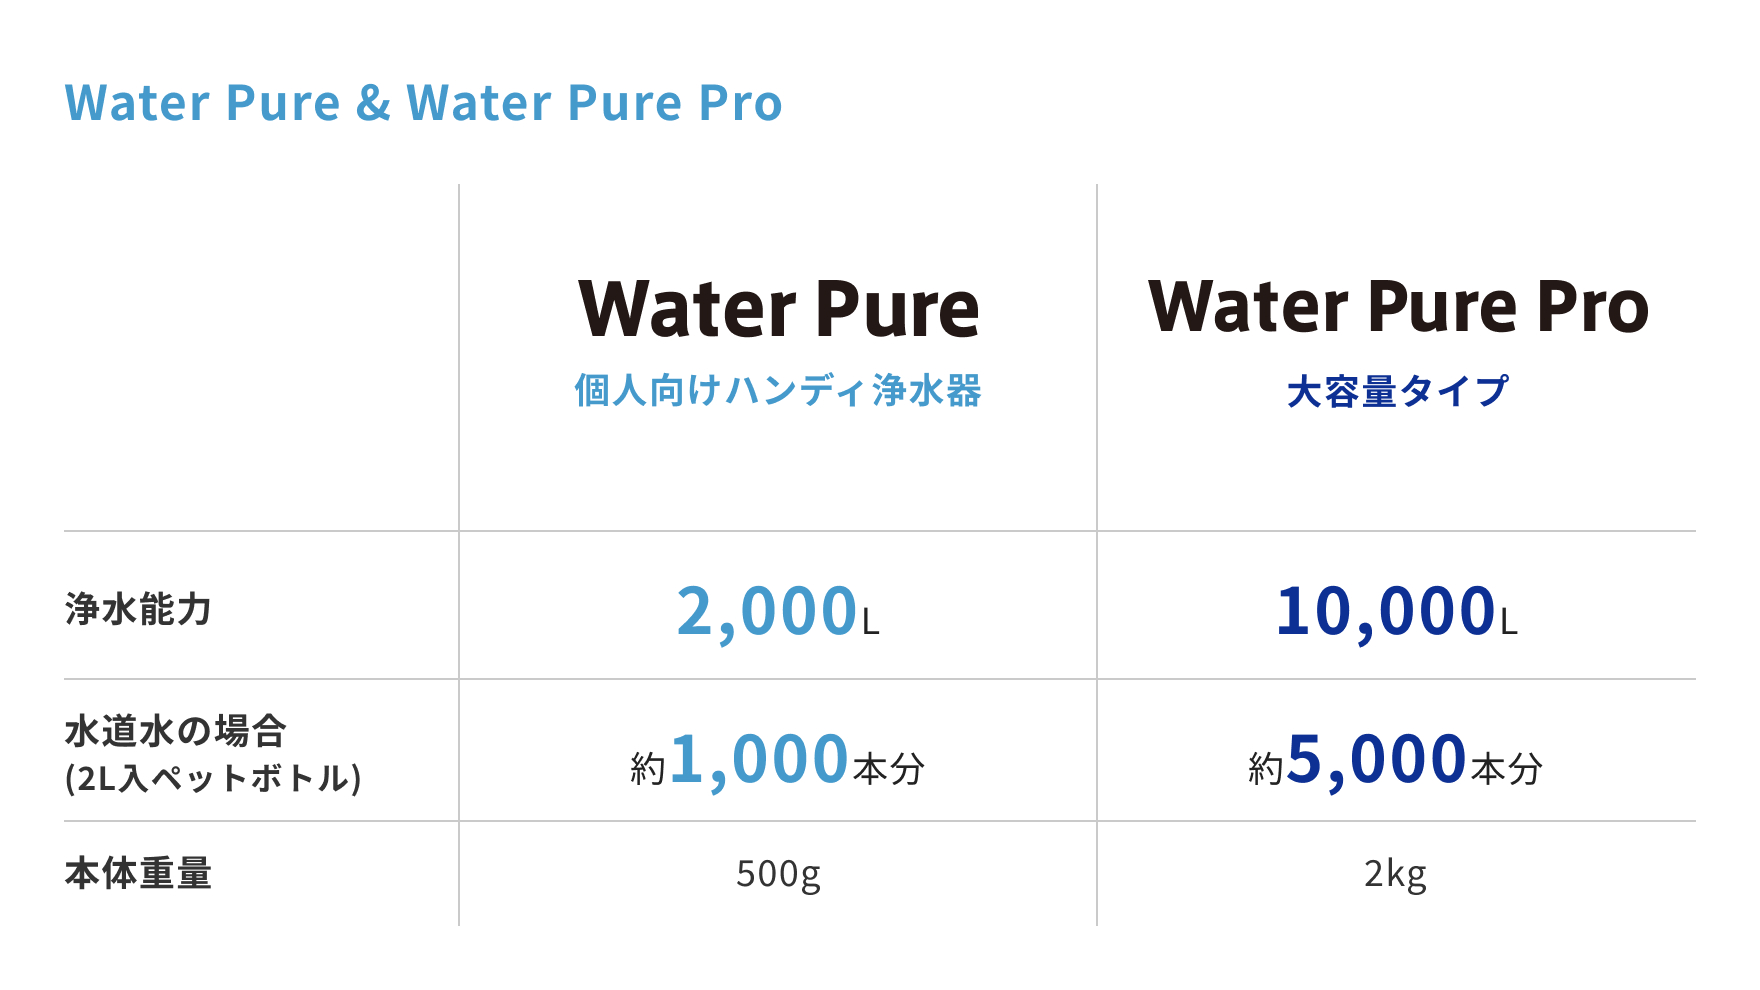 Water Pure & Water Pure Pro